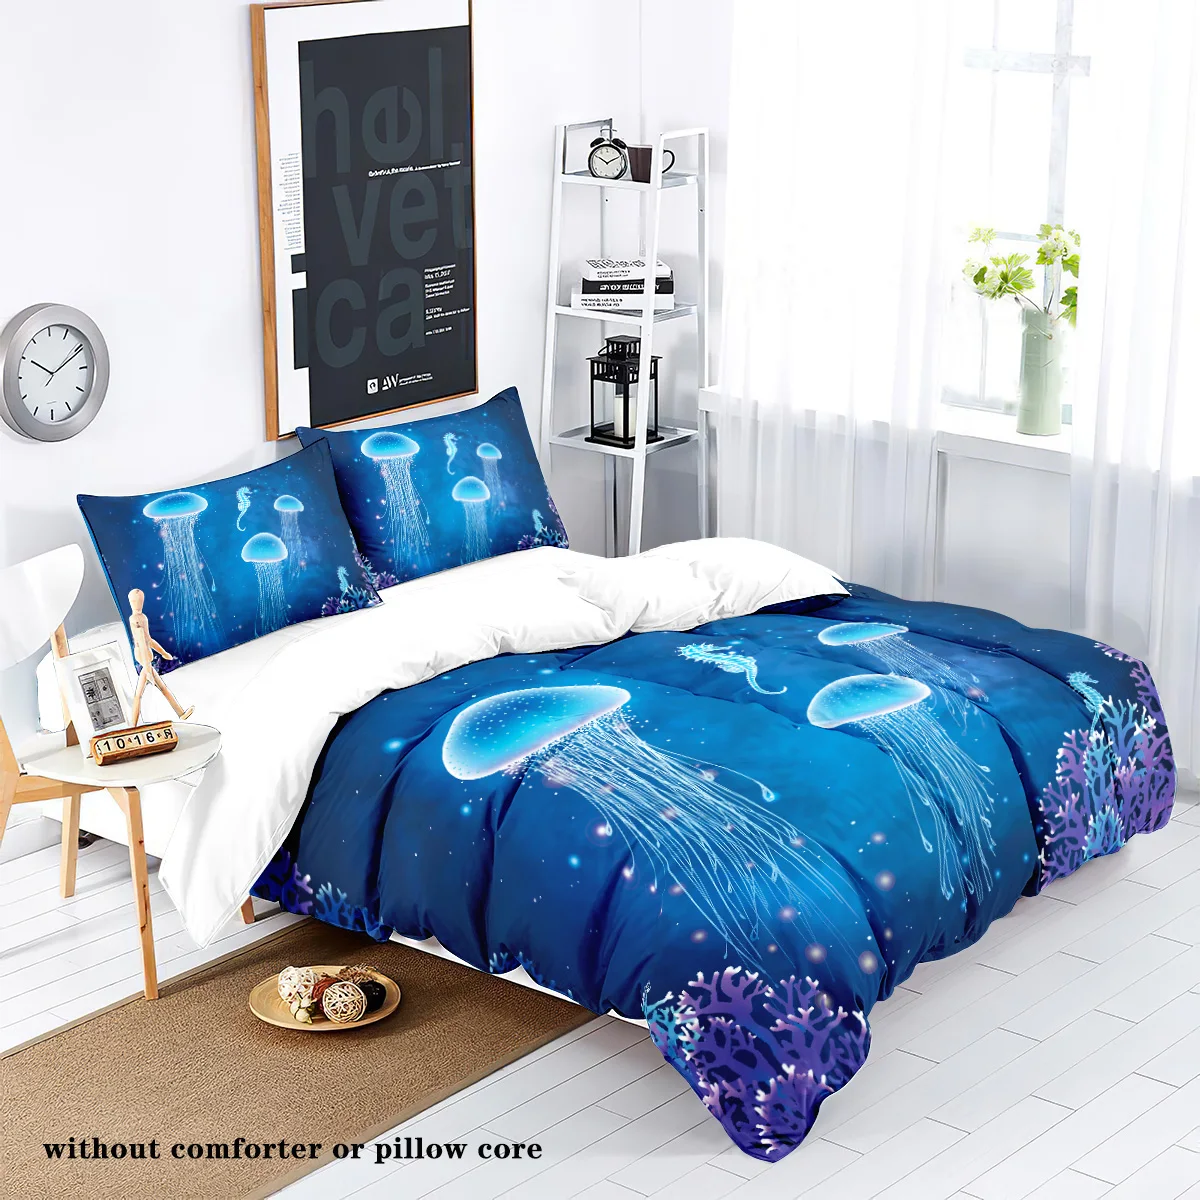 3pcs down duvet cover, jellyfish fashion bedding set, 1*down duvet cover+2*pillowcase, bedrooms, guest rooms, hotels